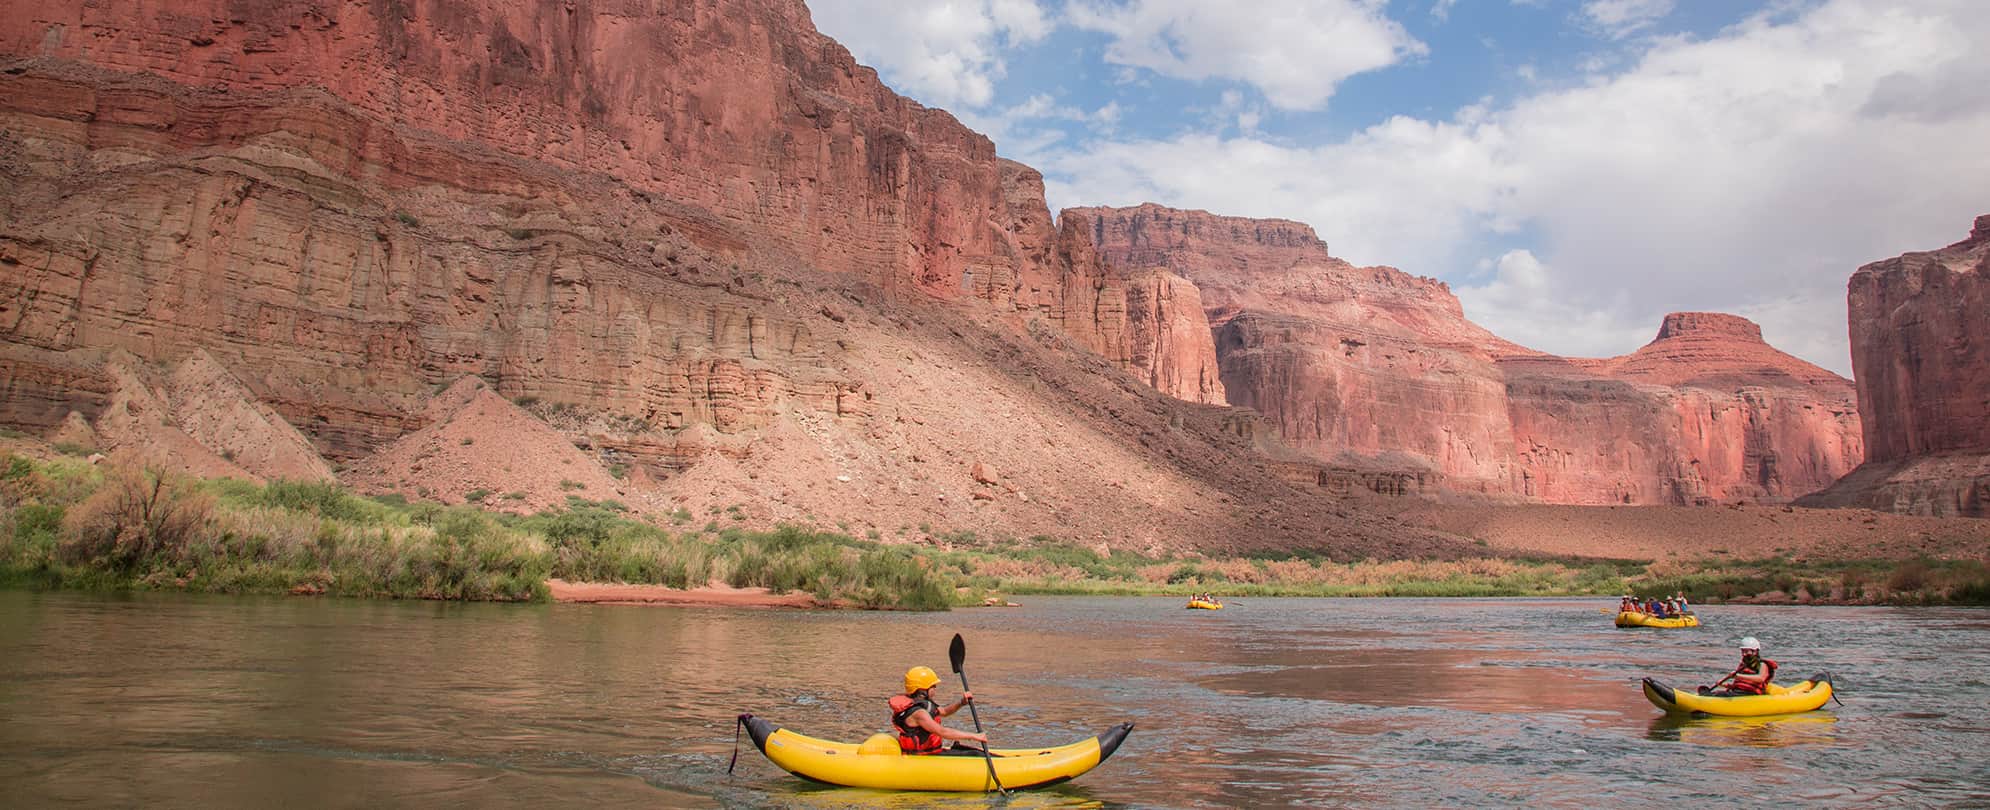 Kayakers at the Grand Canyon, one of the best places to kayak in the U.S.